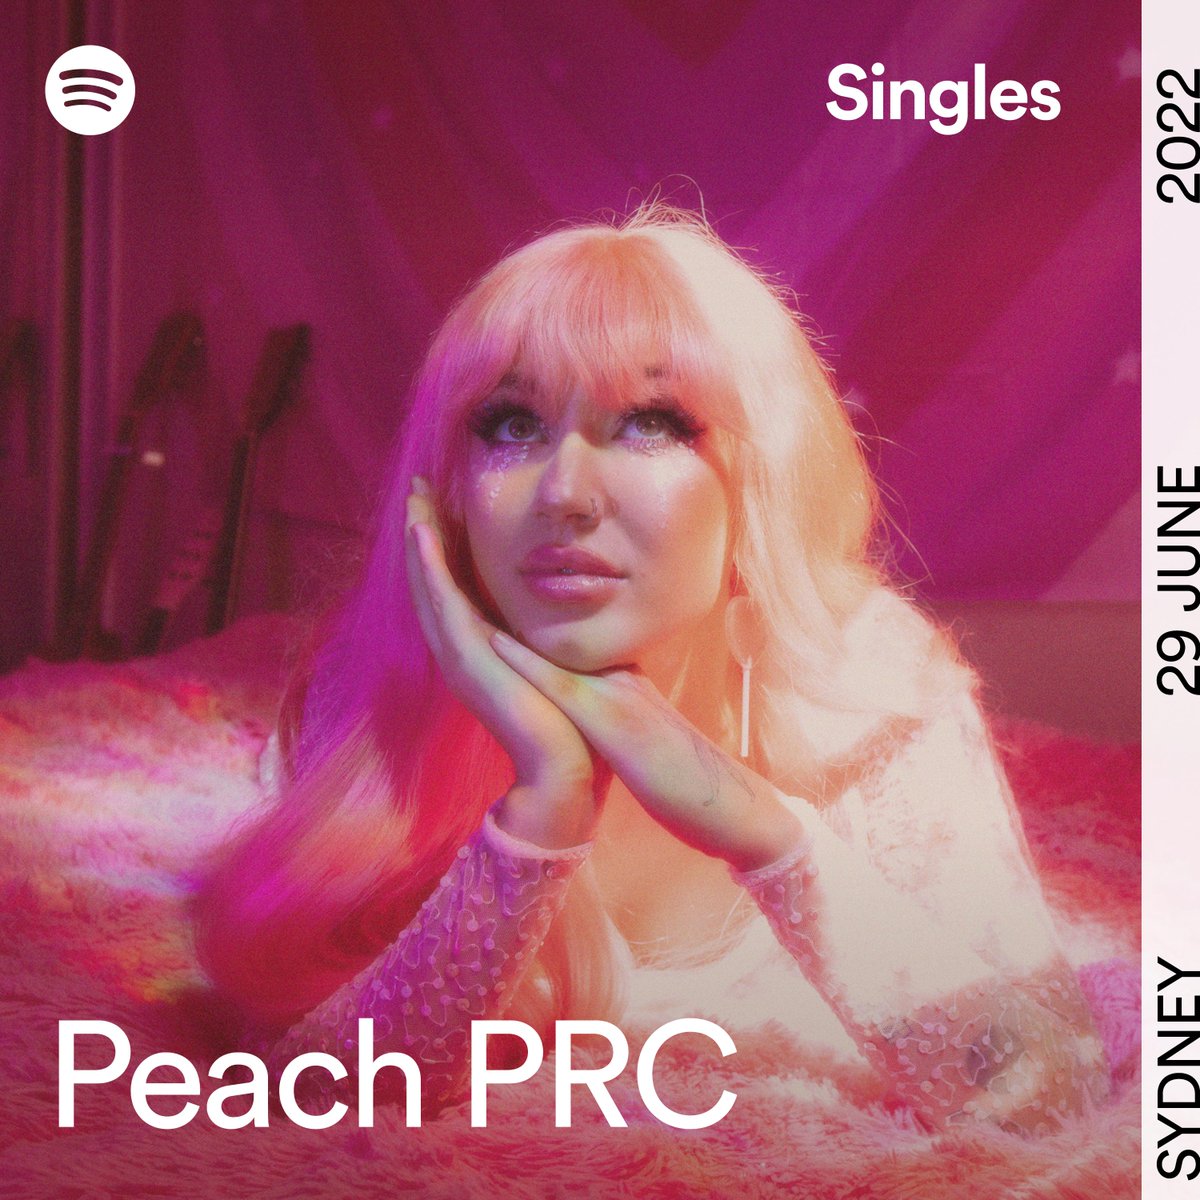 #PeachPRC might feel like a Teenage Dirtbag, but this cover is ✨flawless✨ Check it out alongside a reimagining of God Is A Freak for #SpotifySingles spotify.link/peachsingles